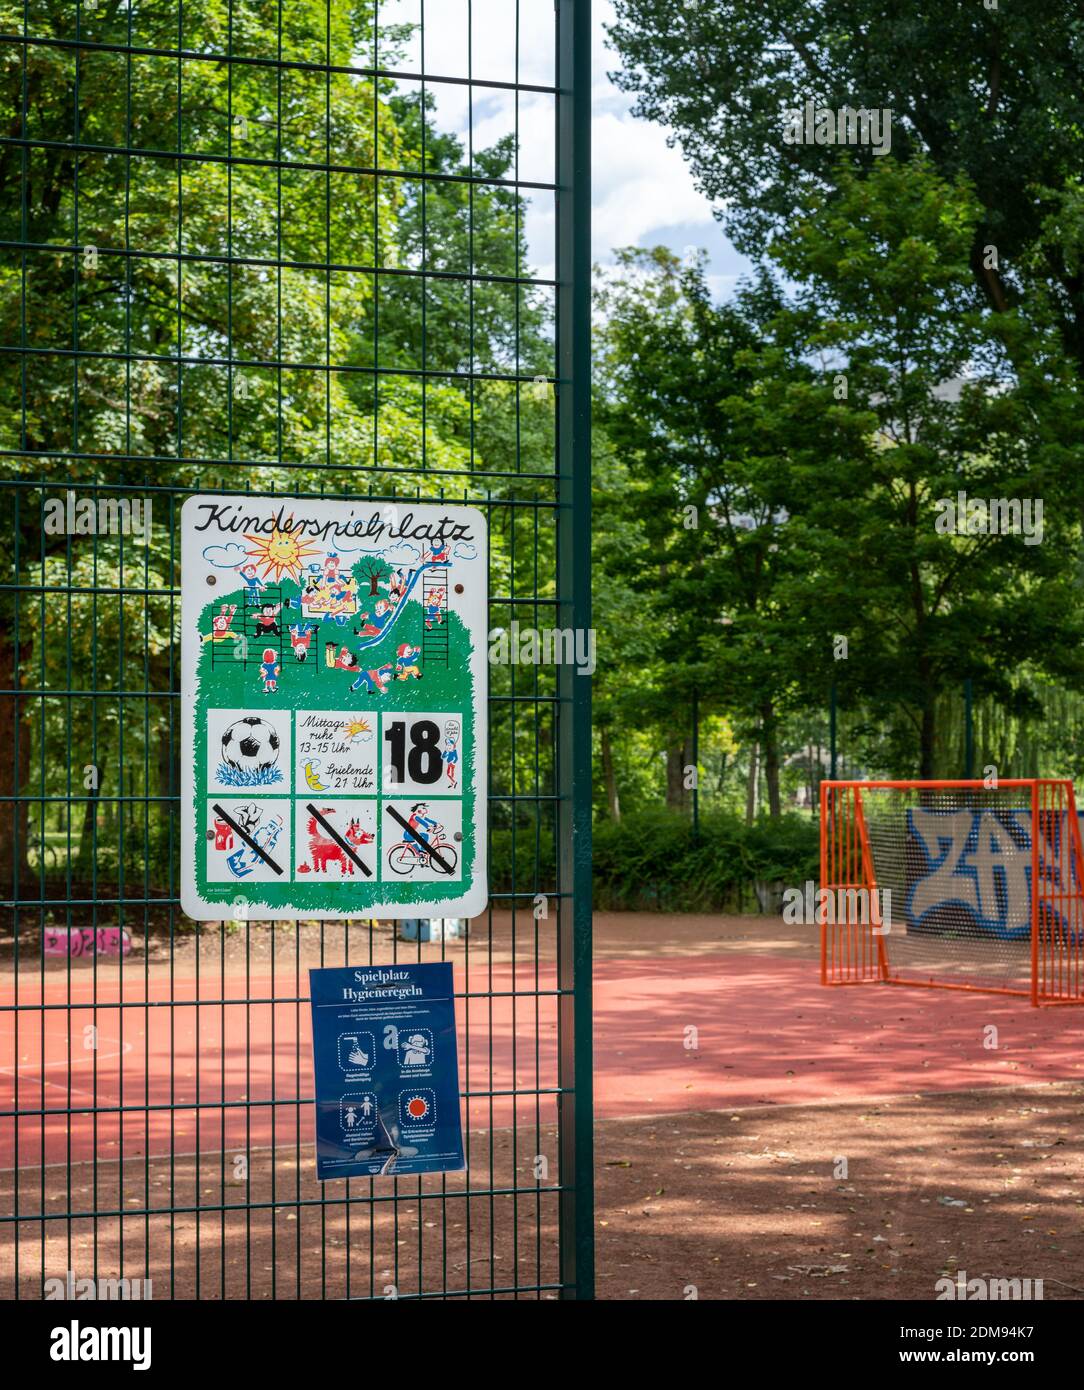 Children S Playground With Rules Stock Photo